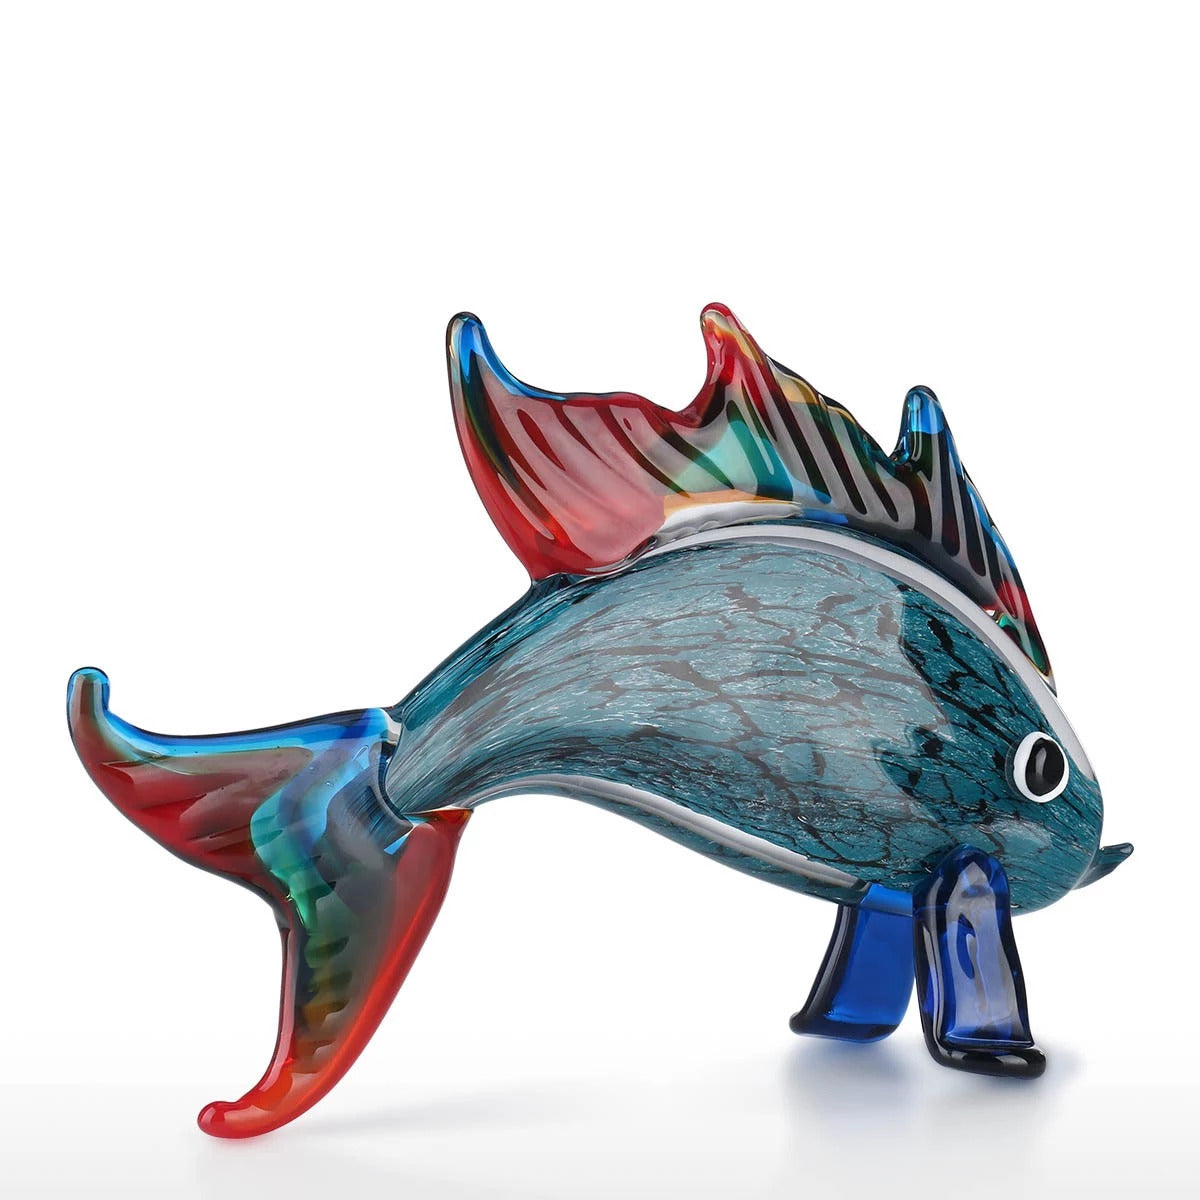 Gifts For Fishing Lovers with Glass Sculpture for Aquarium Decor